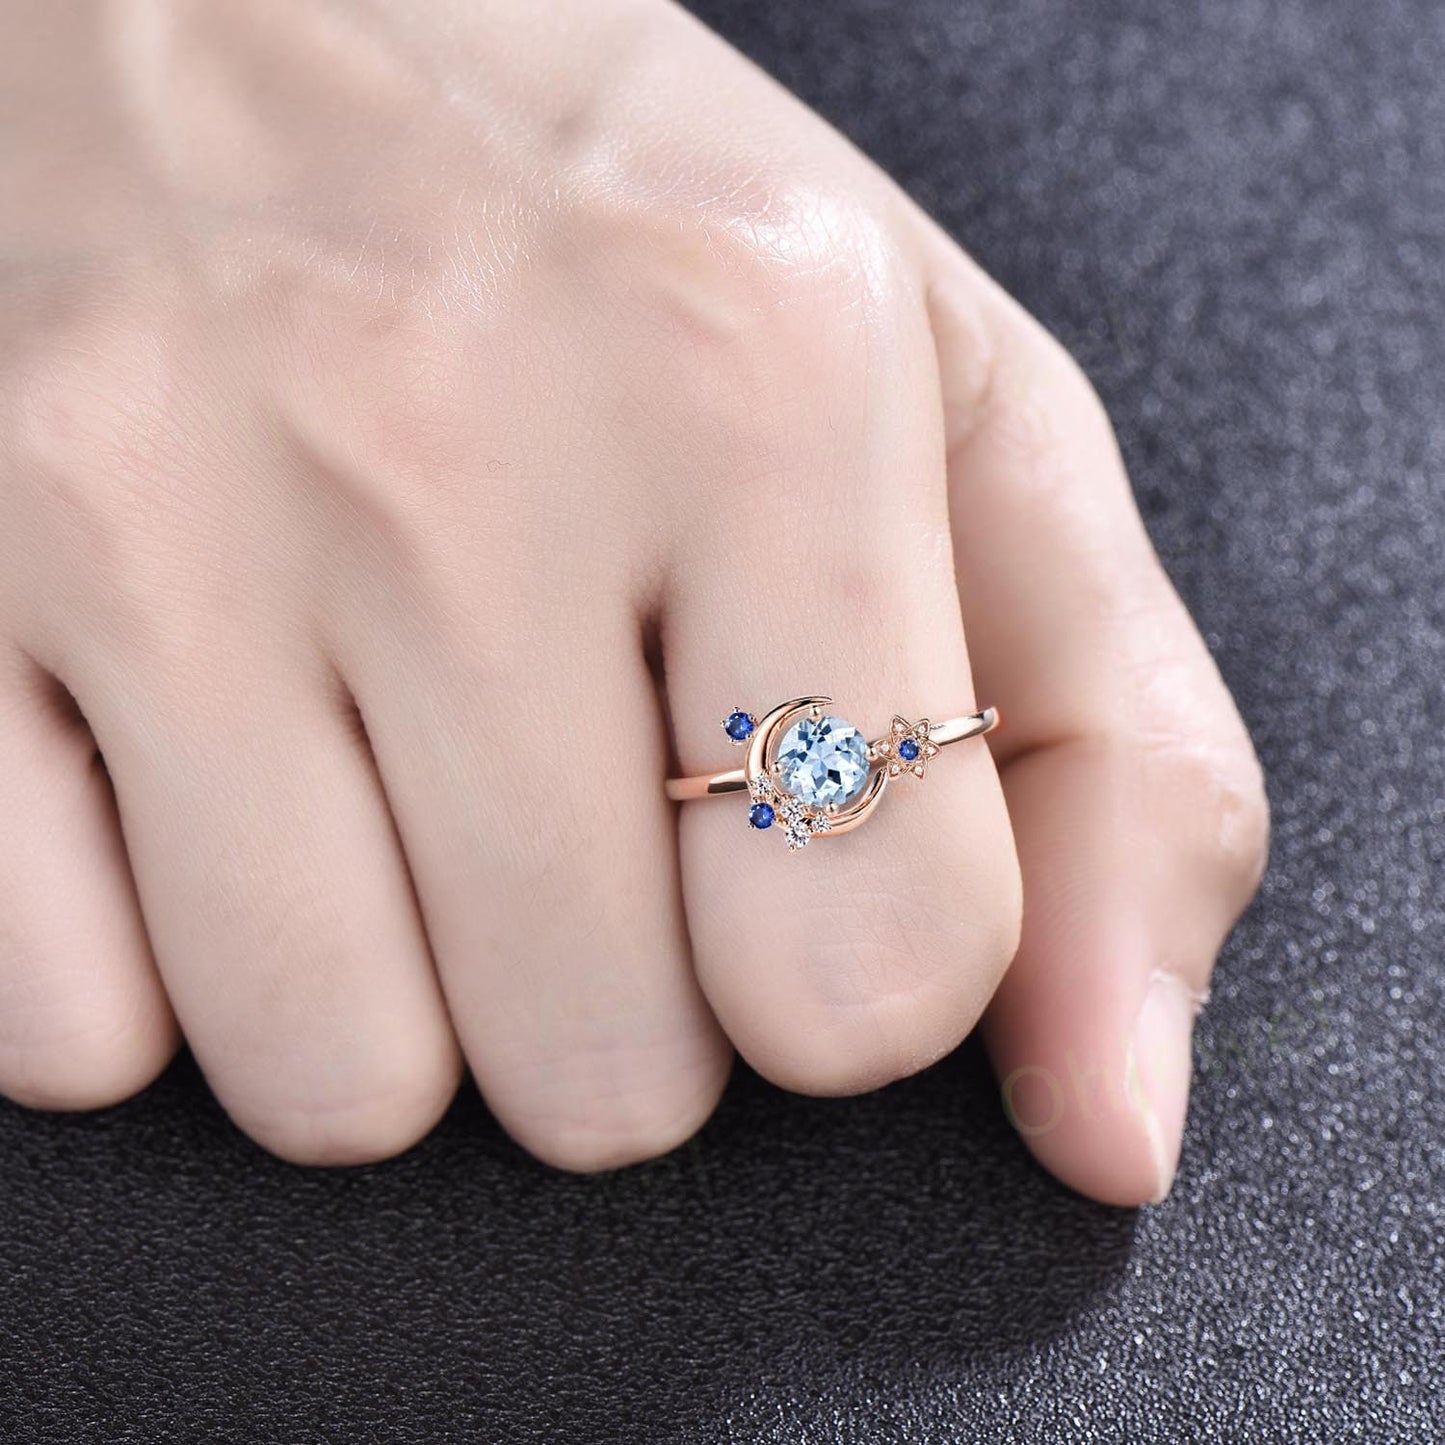 Vintage round Aquamarine engagement ring solid 14k gold cluster moon star sapphire ring women flower dainty unique wedding promise ring gift